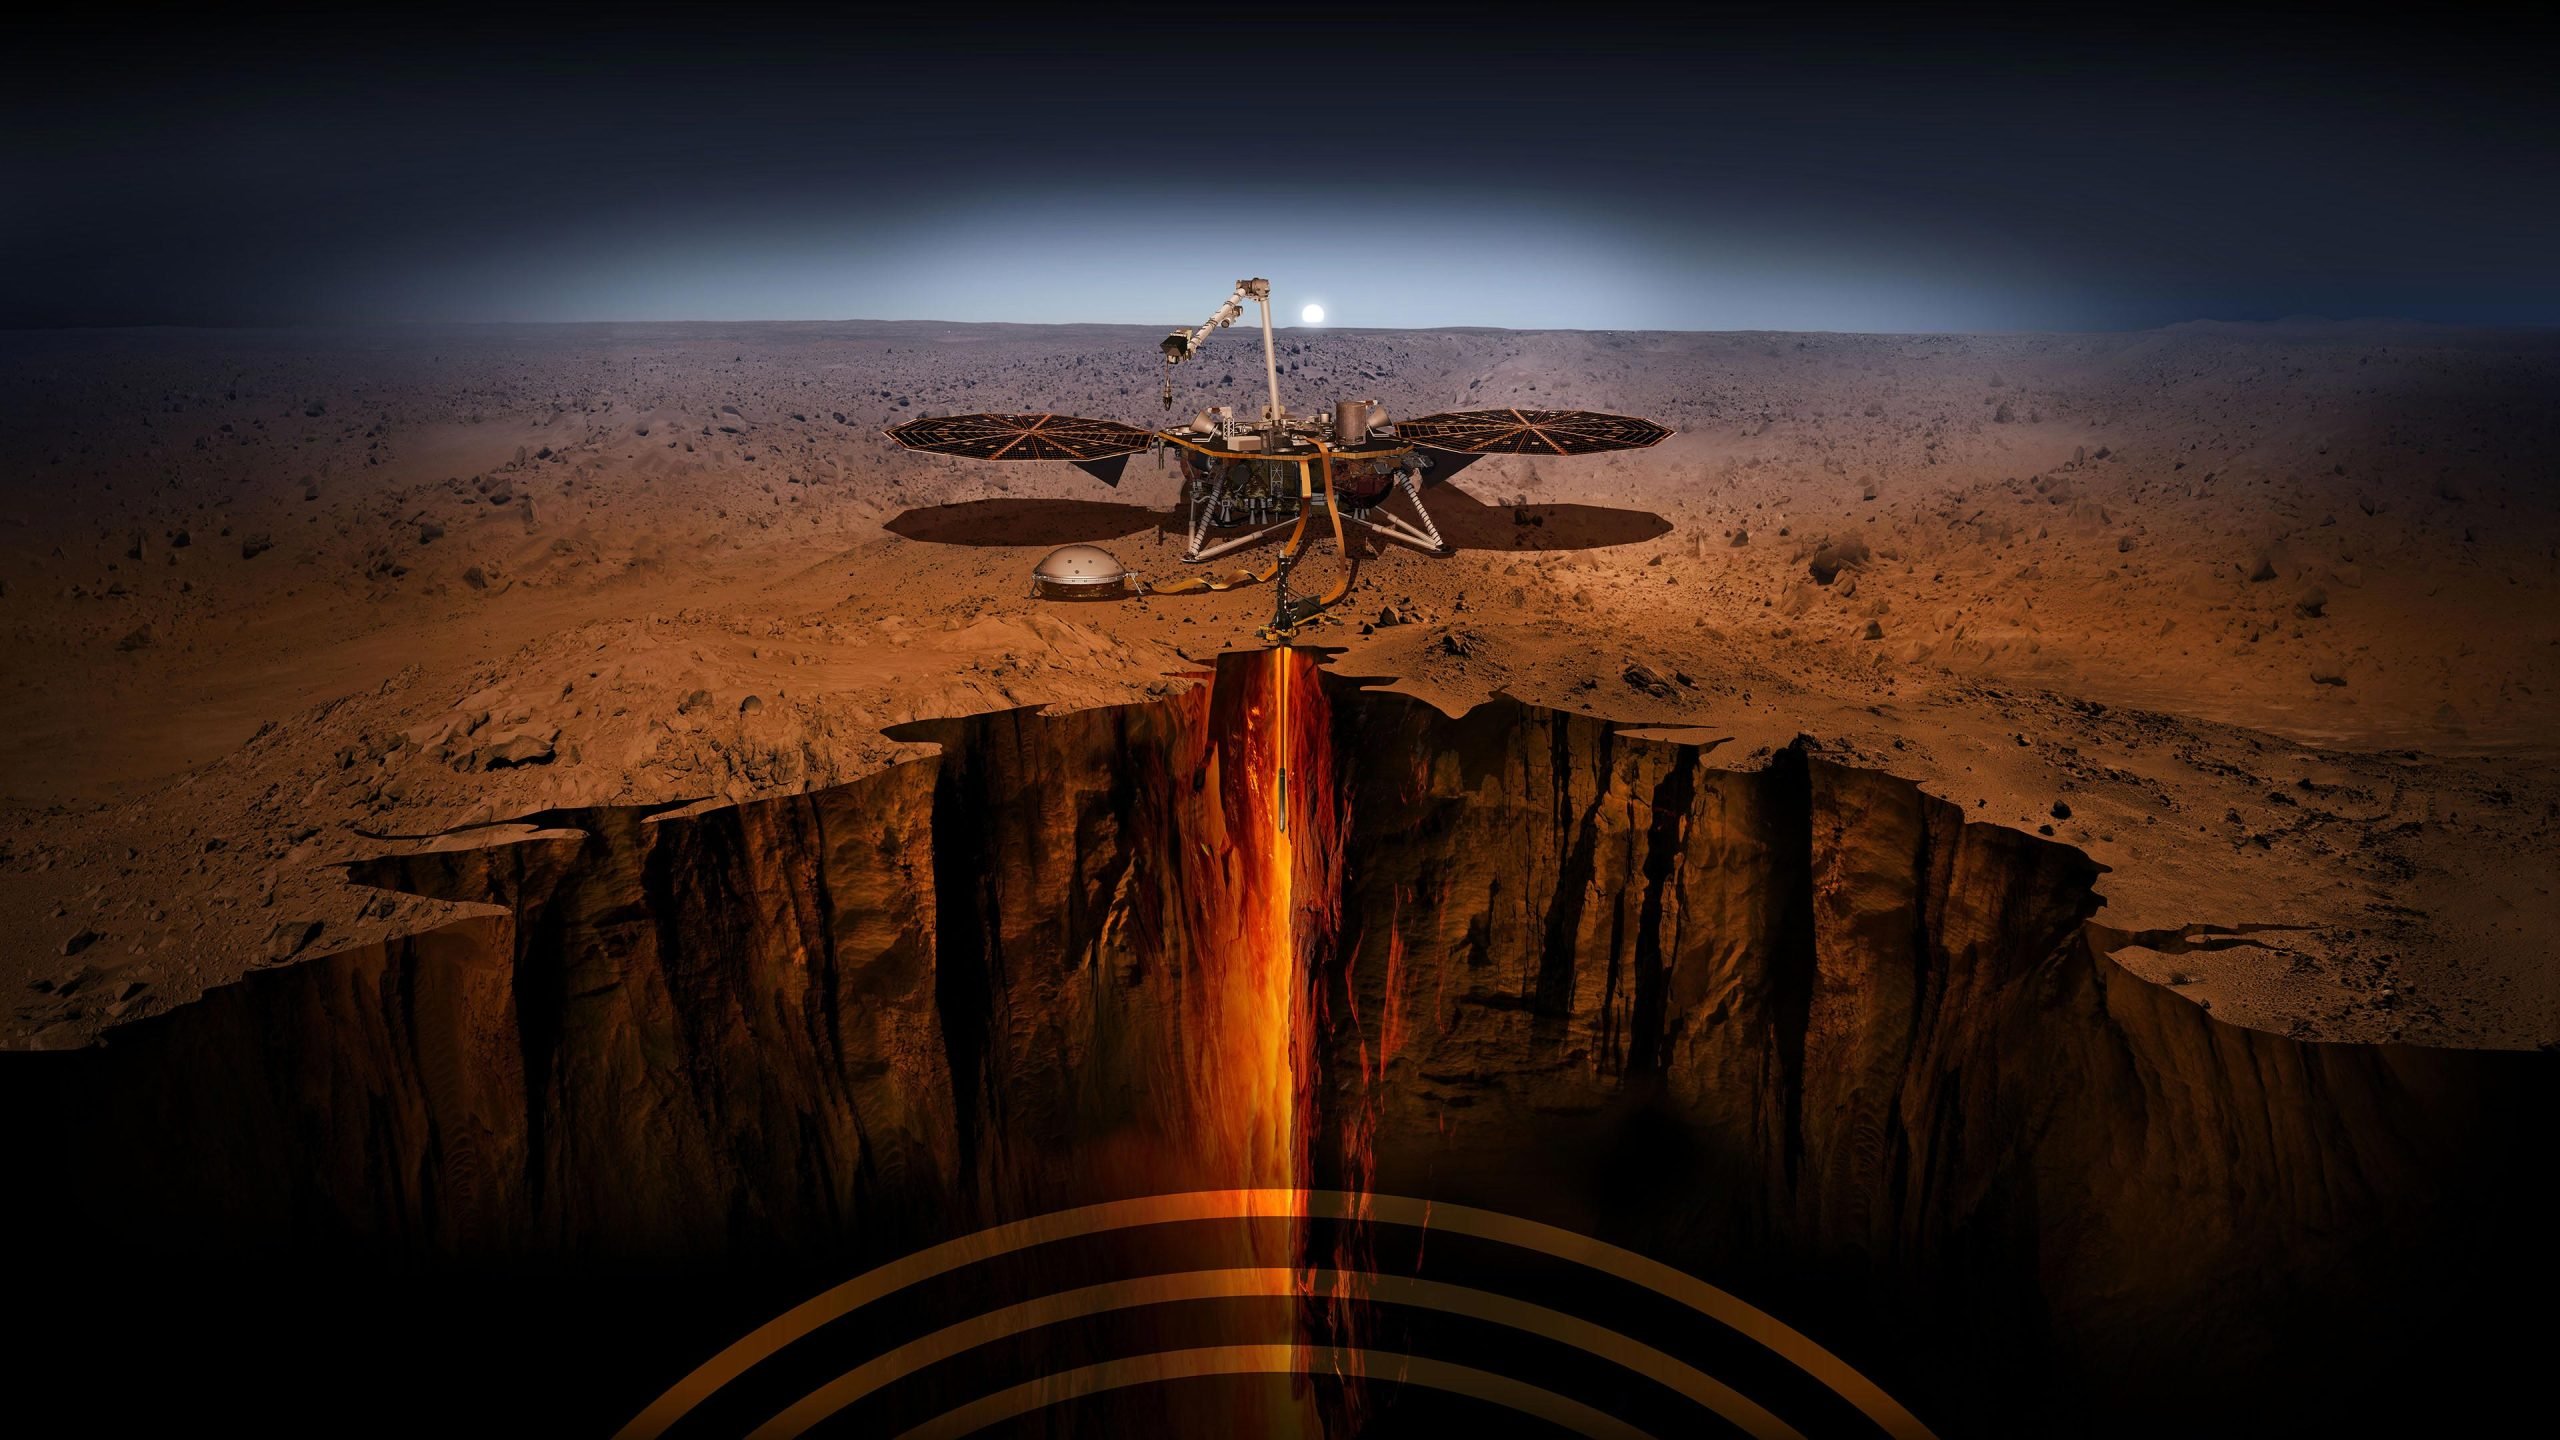 Surprise, Surprise: Subsurface Water On Mars Defies Expectations - SciTechDaily